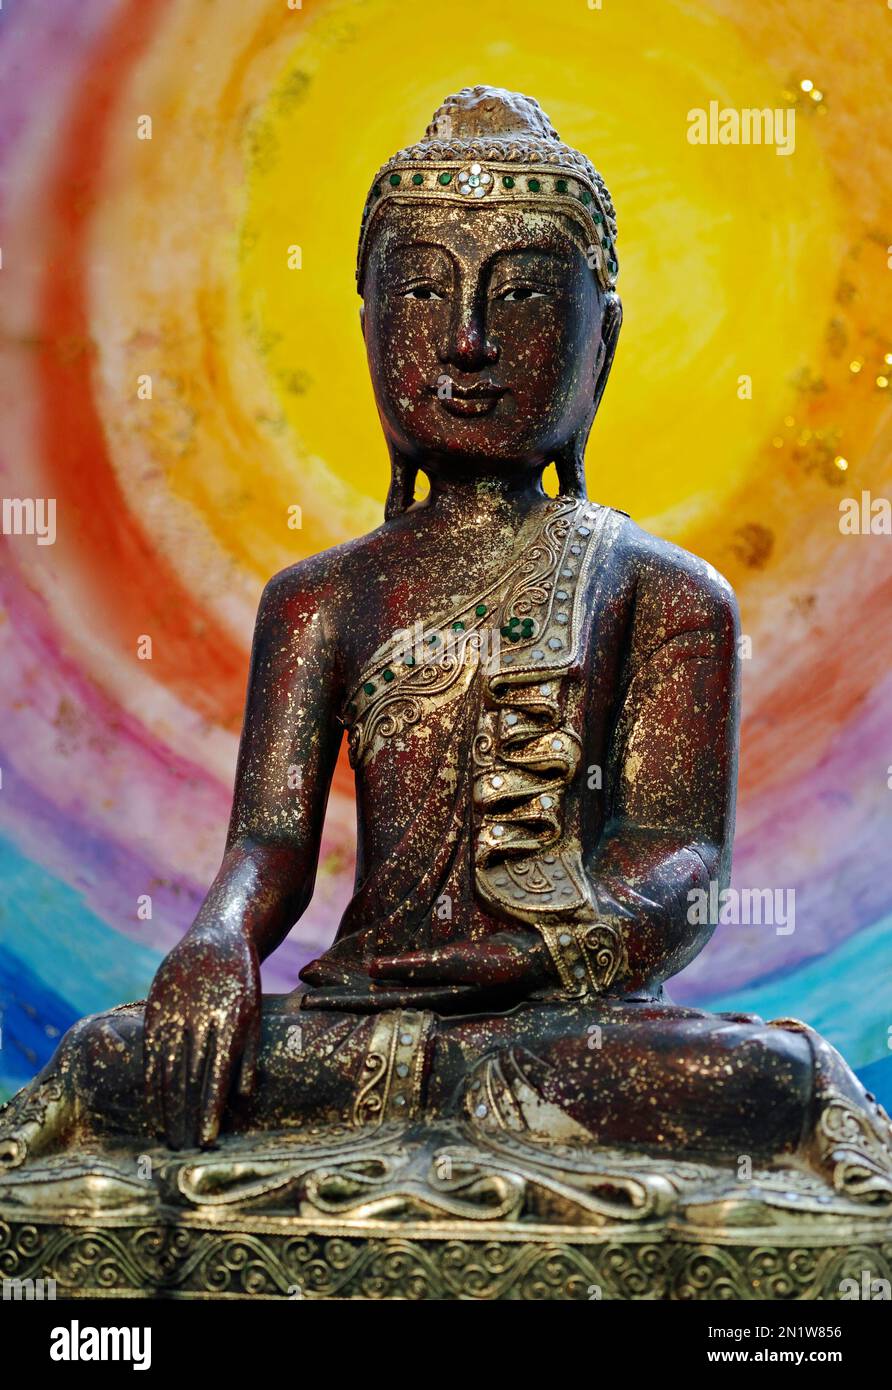 Buddha touching the earth, He is made of wood and decorated with gold. Probably made in India. In the background is a painting with rainbow colors. Stock Photo